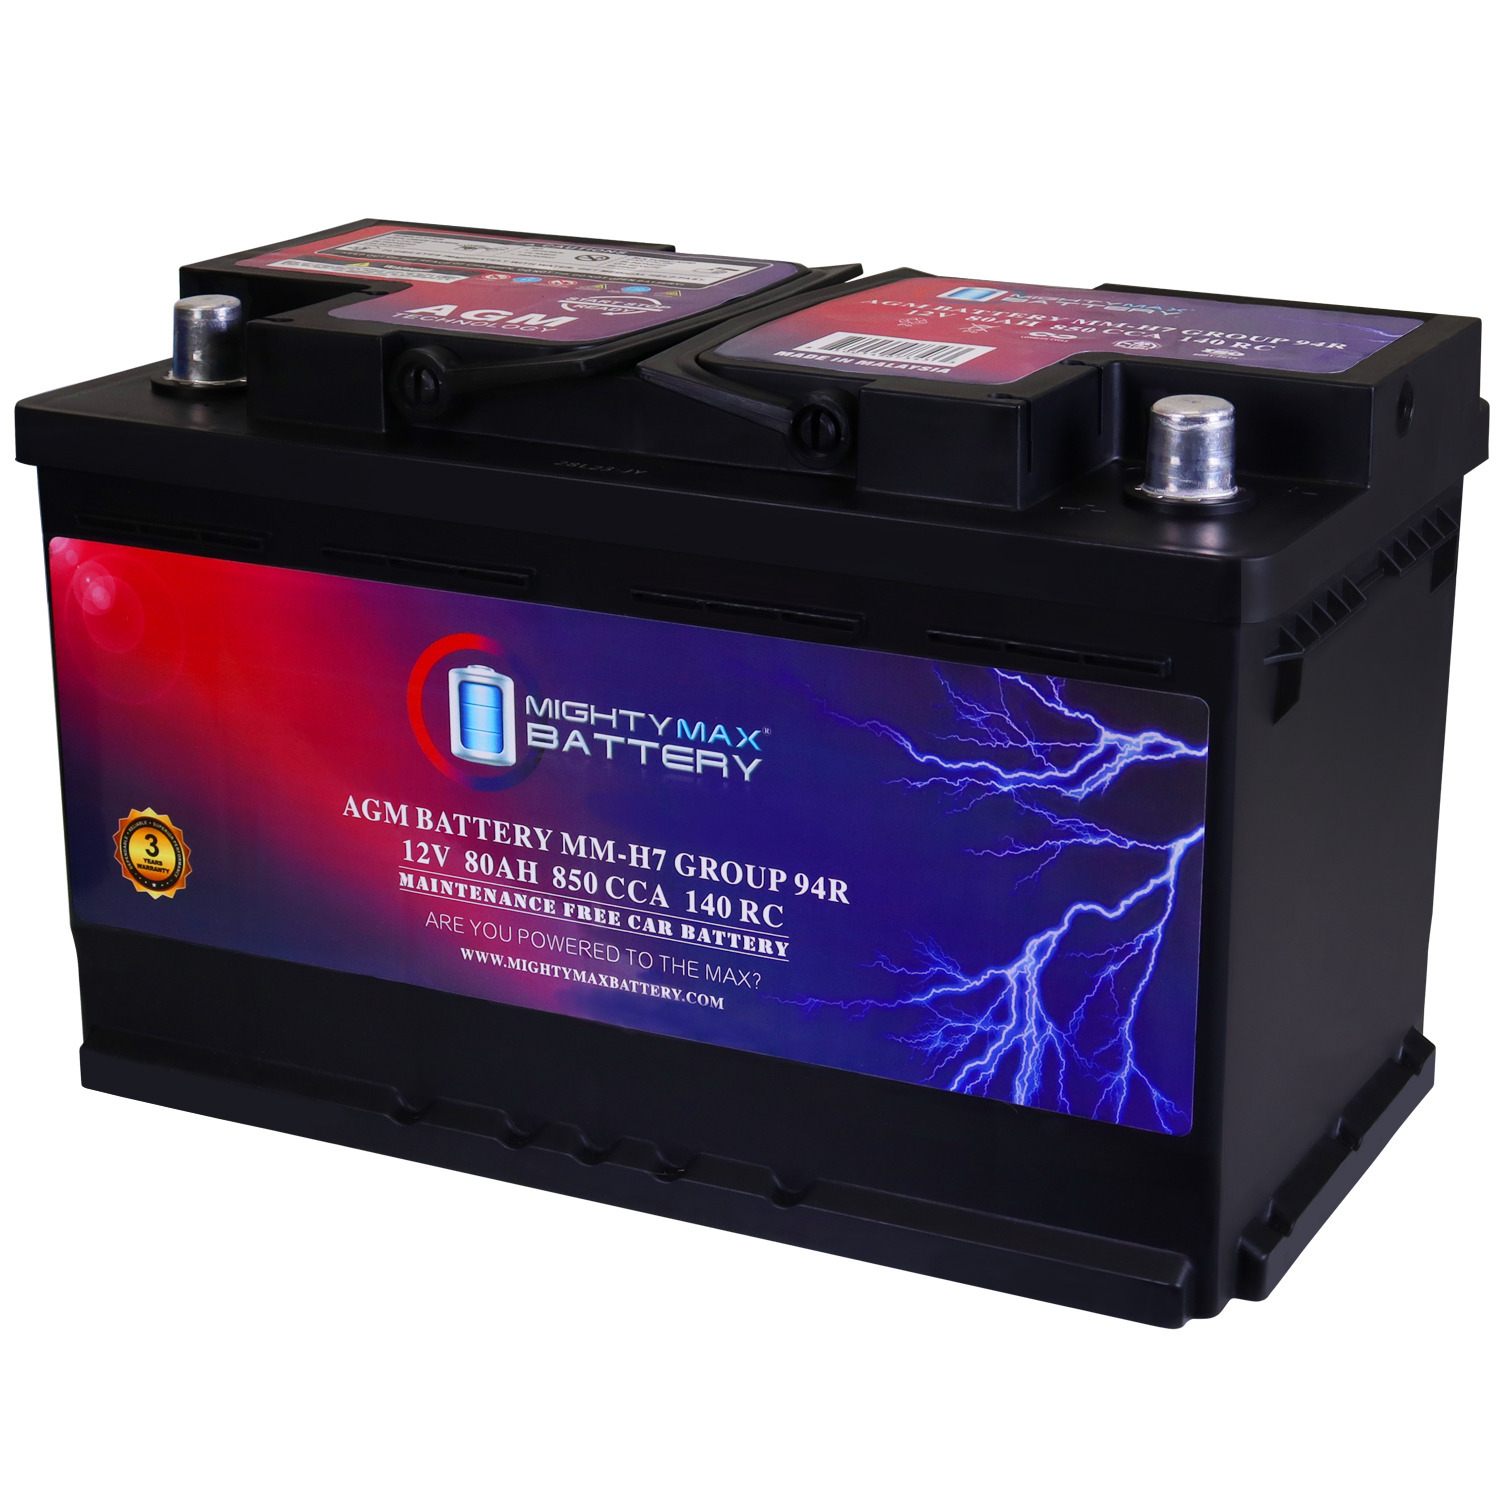 MM-H7 Group 94R 12V 80AH 140RC 850 CCA Replacement Battery Compatible with Jeep Commander 06-10